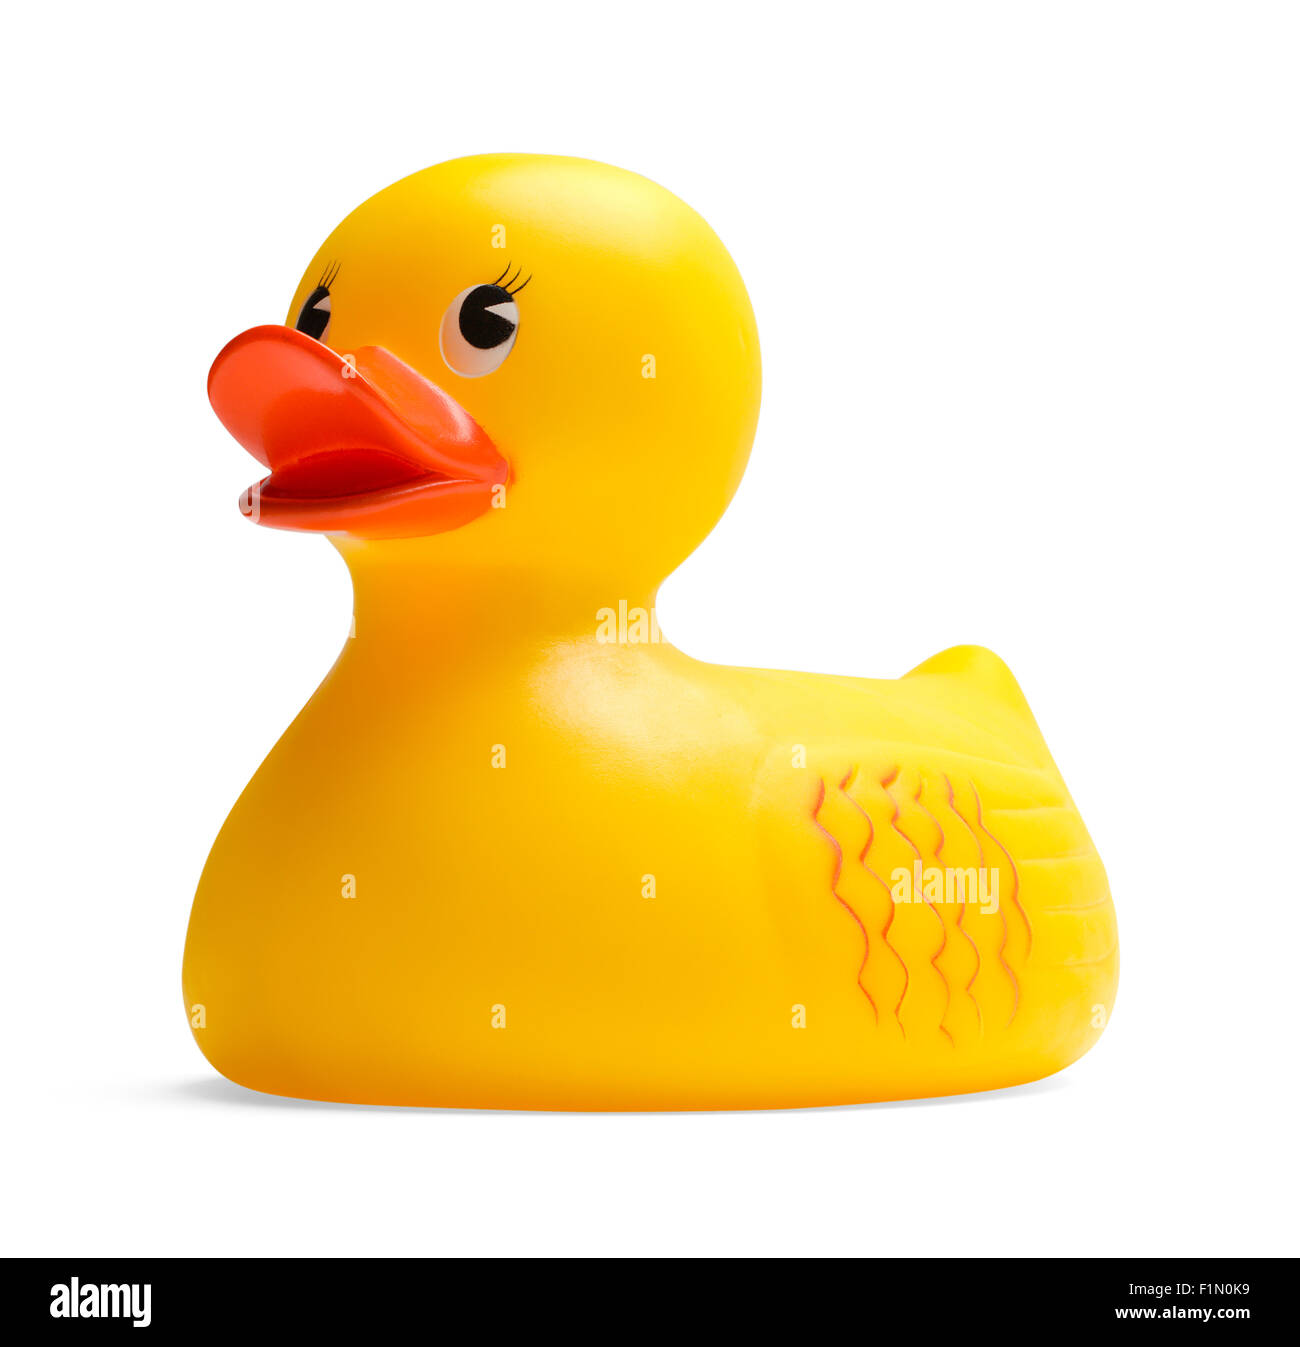 Toy Rubber Duck Isolated on a White Background. Stock Photo